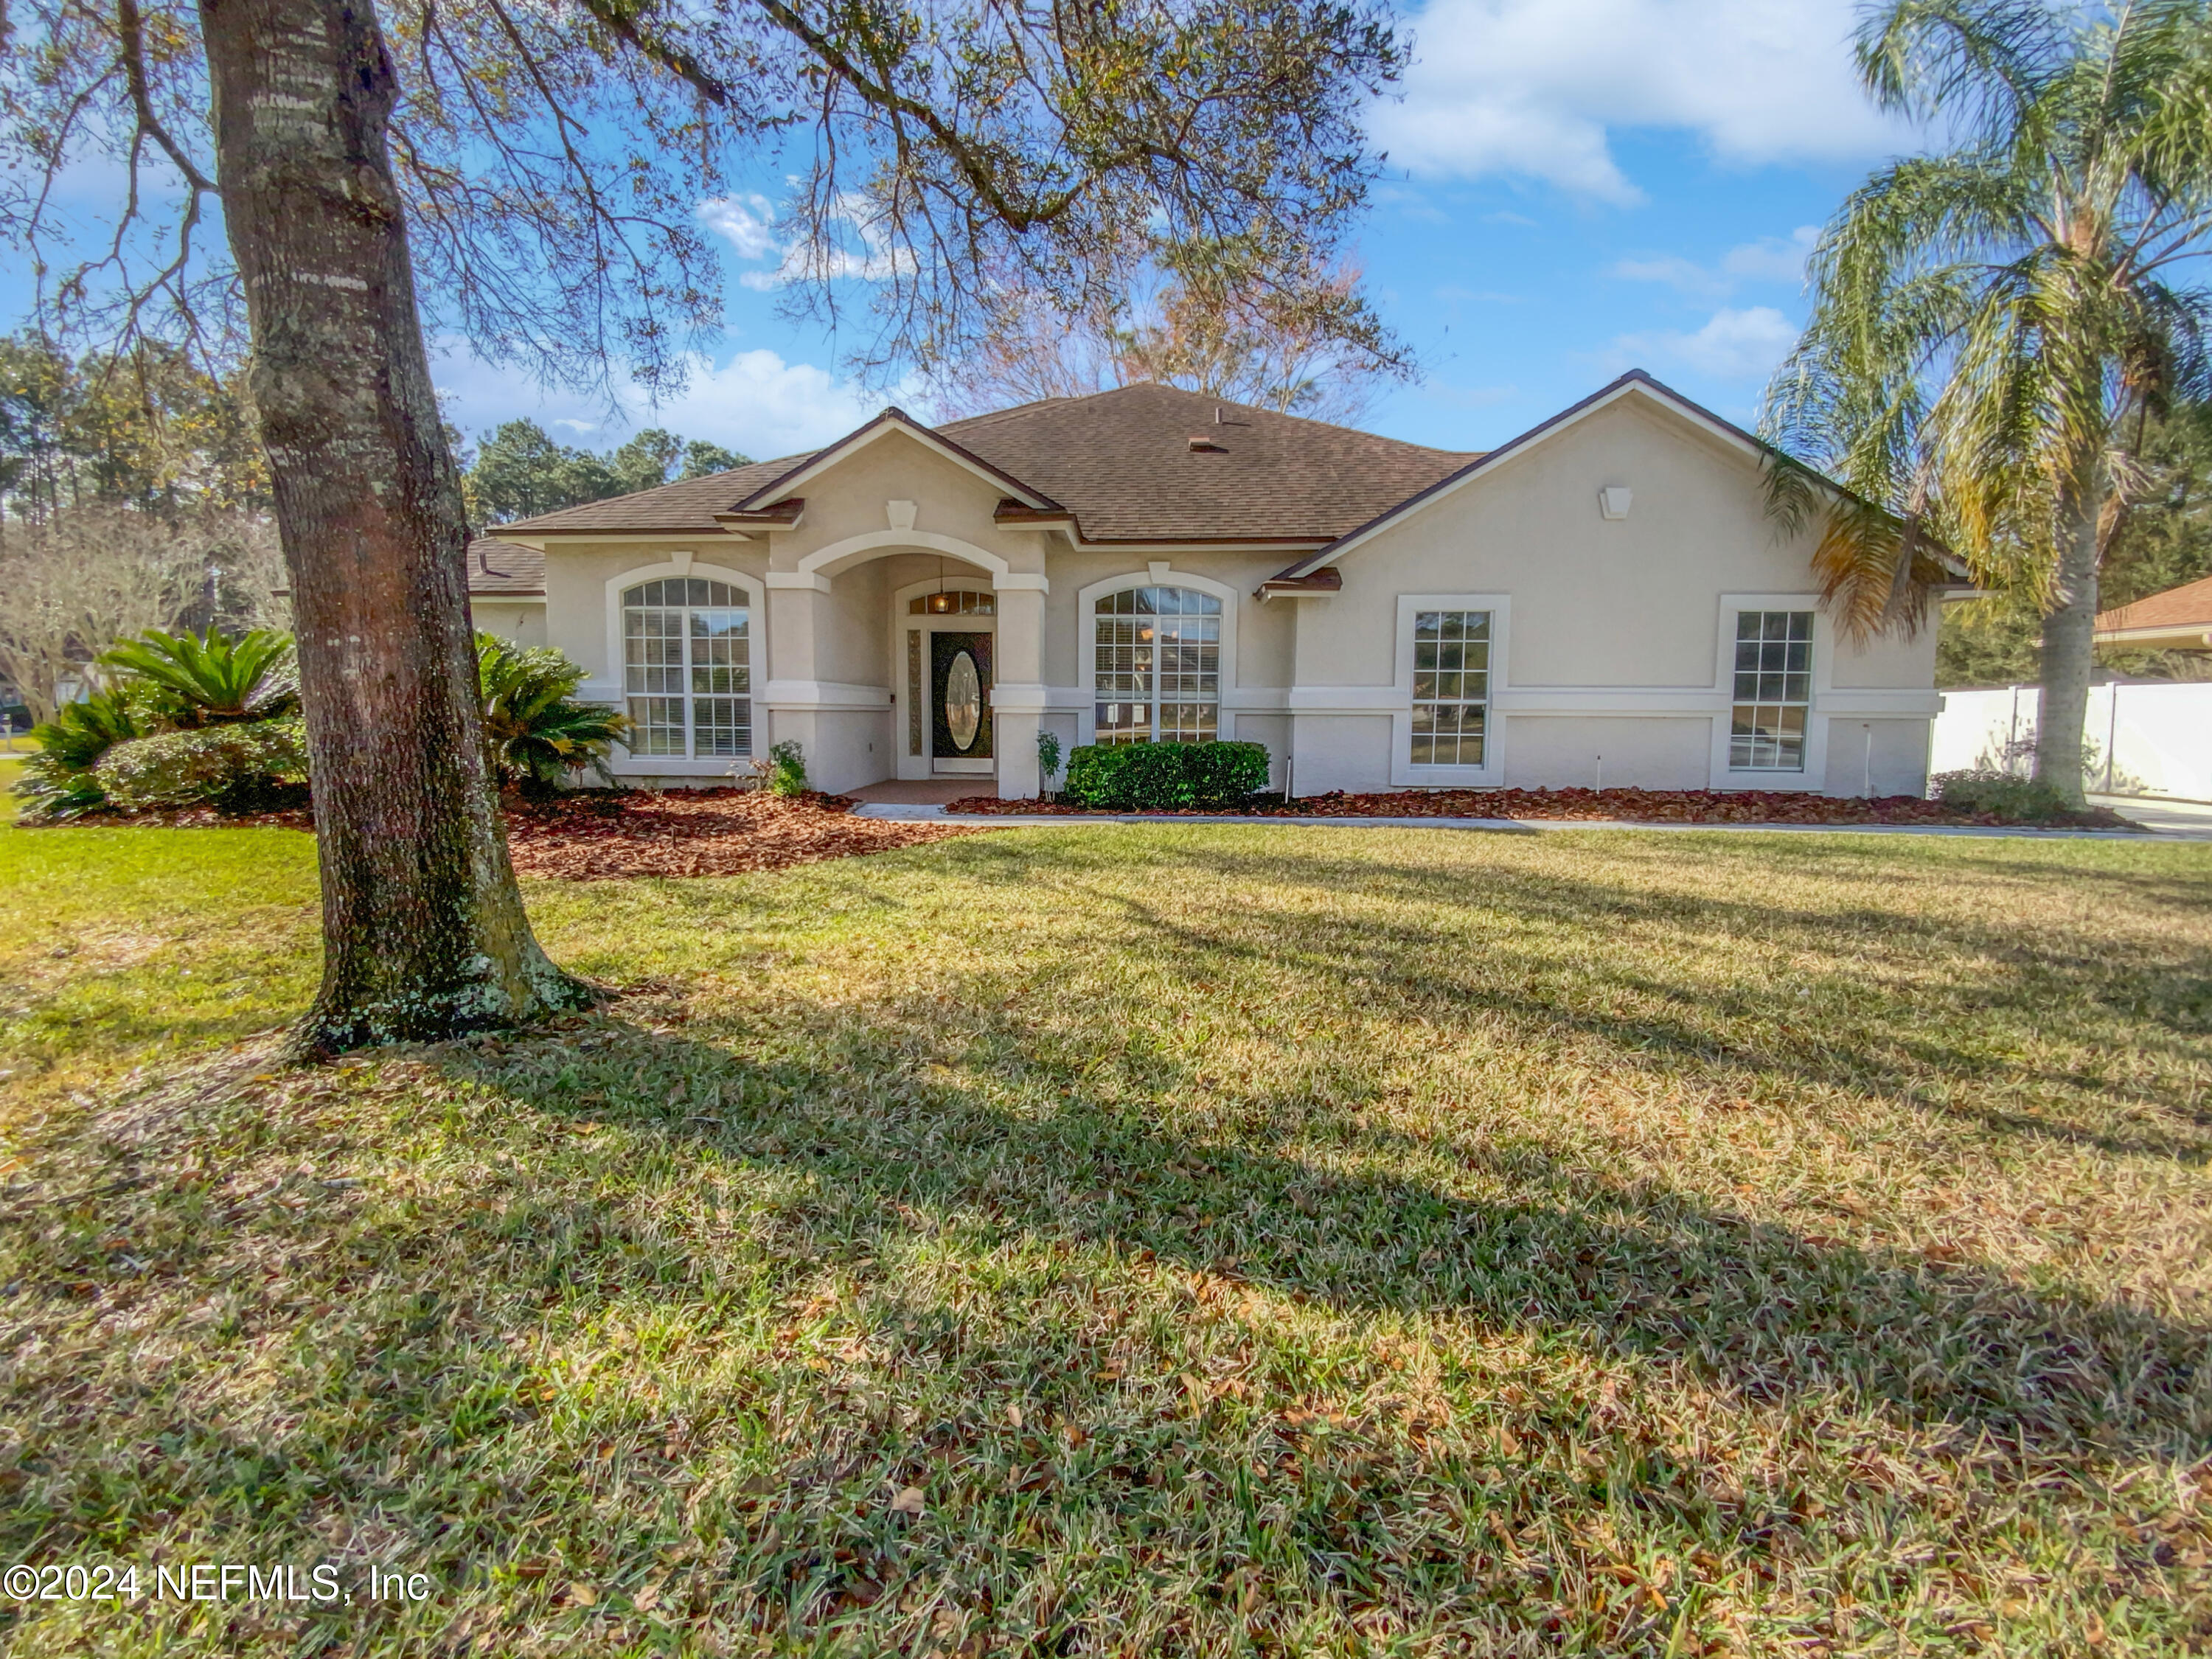 St Johns, FL home for sale located at 689 Box Branch Circle, St Johns, FL 32259